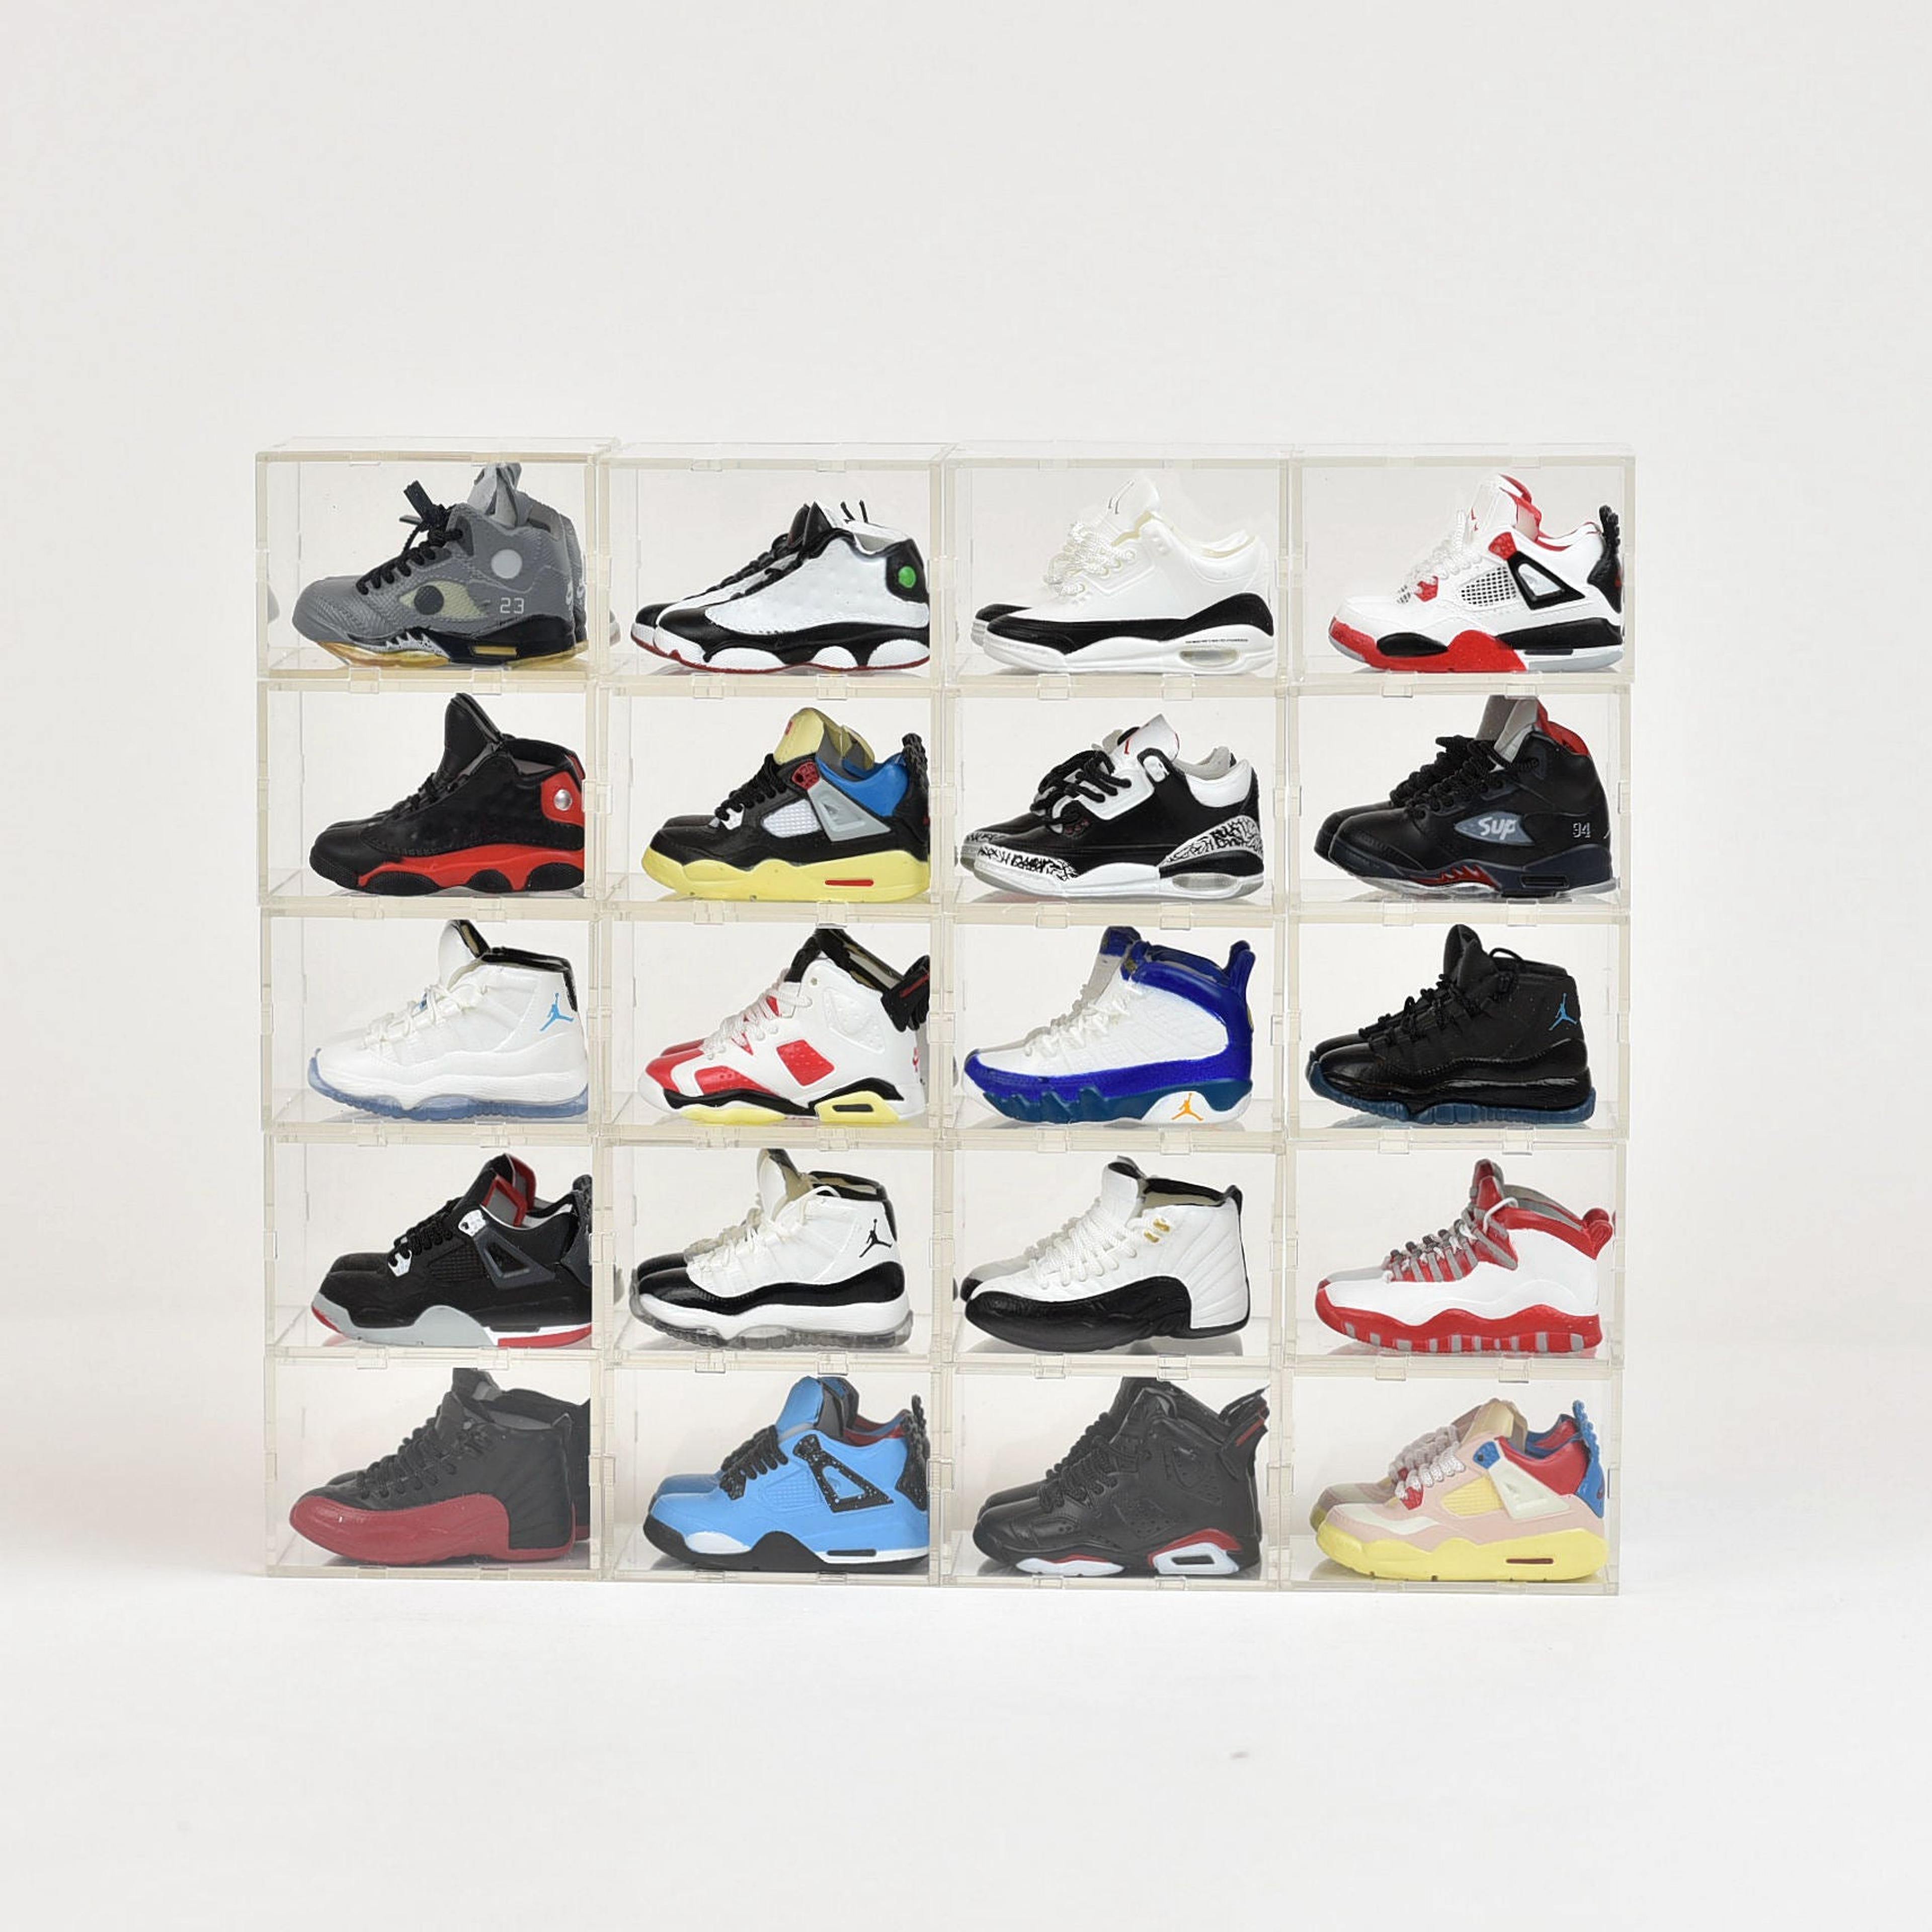 Alternate View 6 of AJ2-AJ13 Mini Sneakers Collection with Display Case